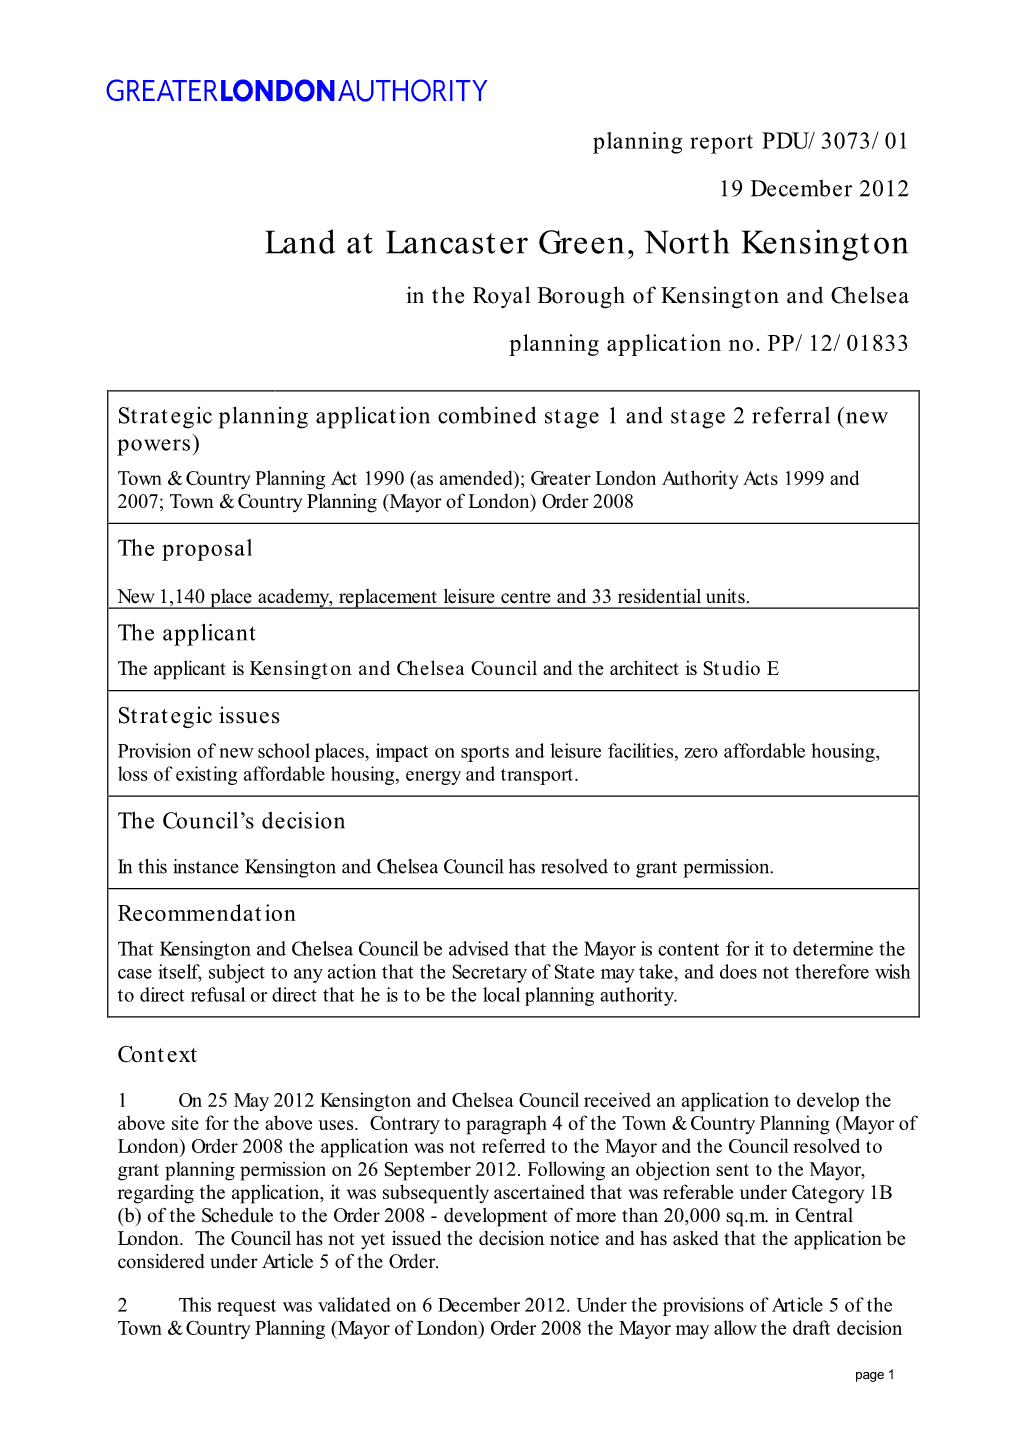 Land at Lancaster Green, North Kensington in the Royal Borough of Kensington and Chelsea Planning Application No